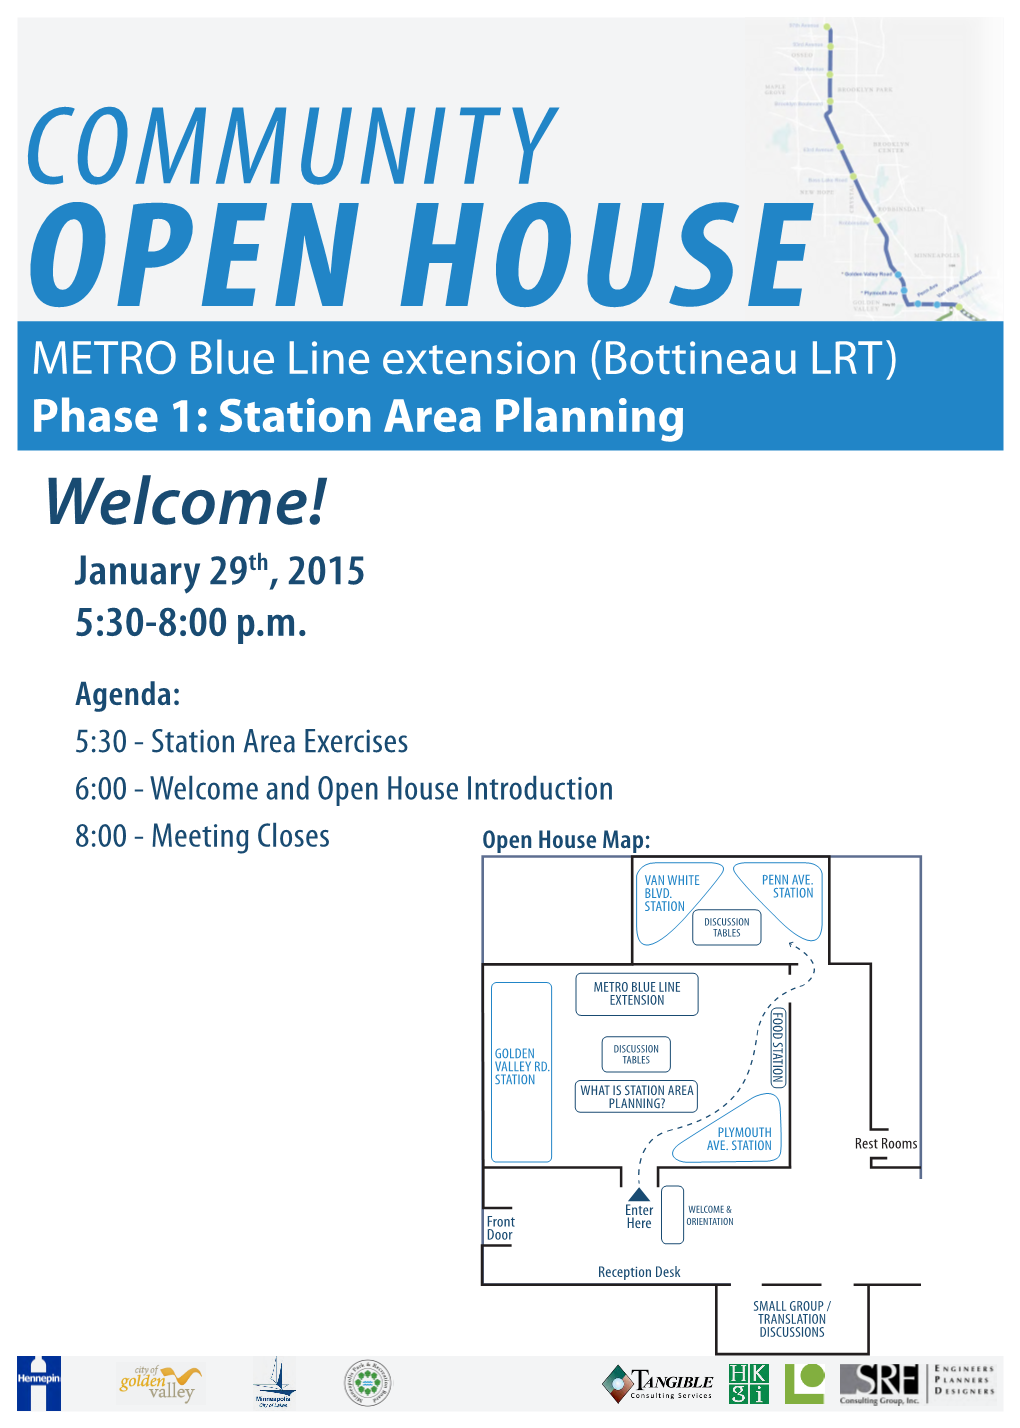 Station Area Planning Welcome! January 29Th, 2015 5:30-8:00 P.M